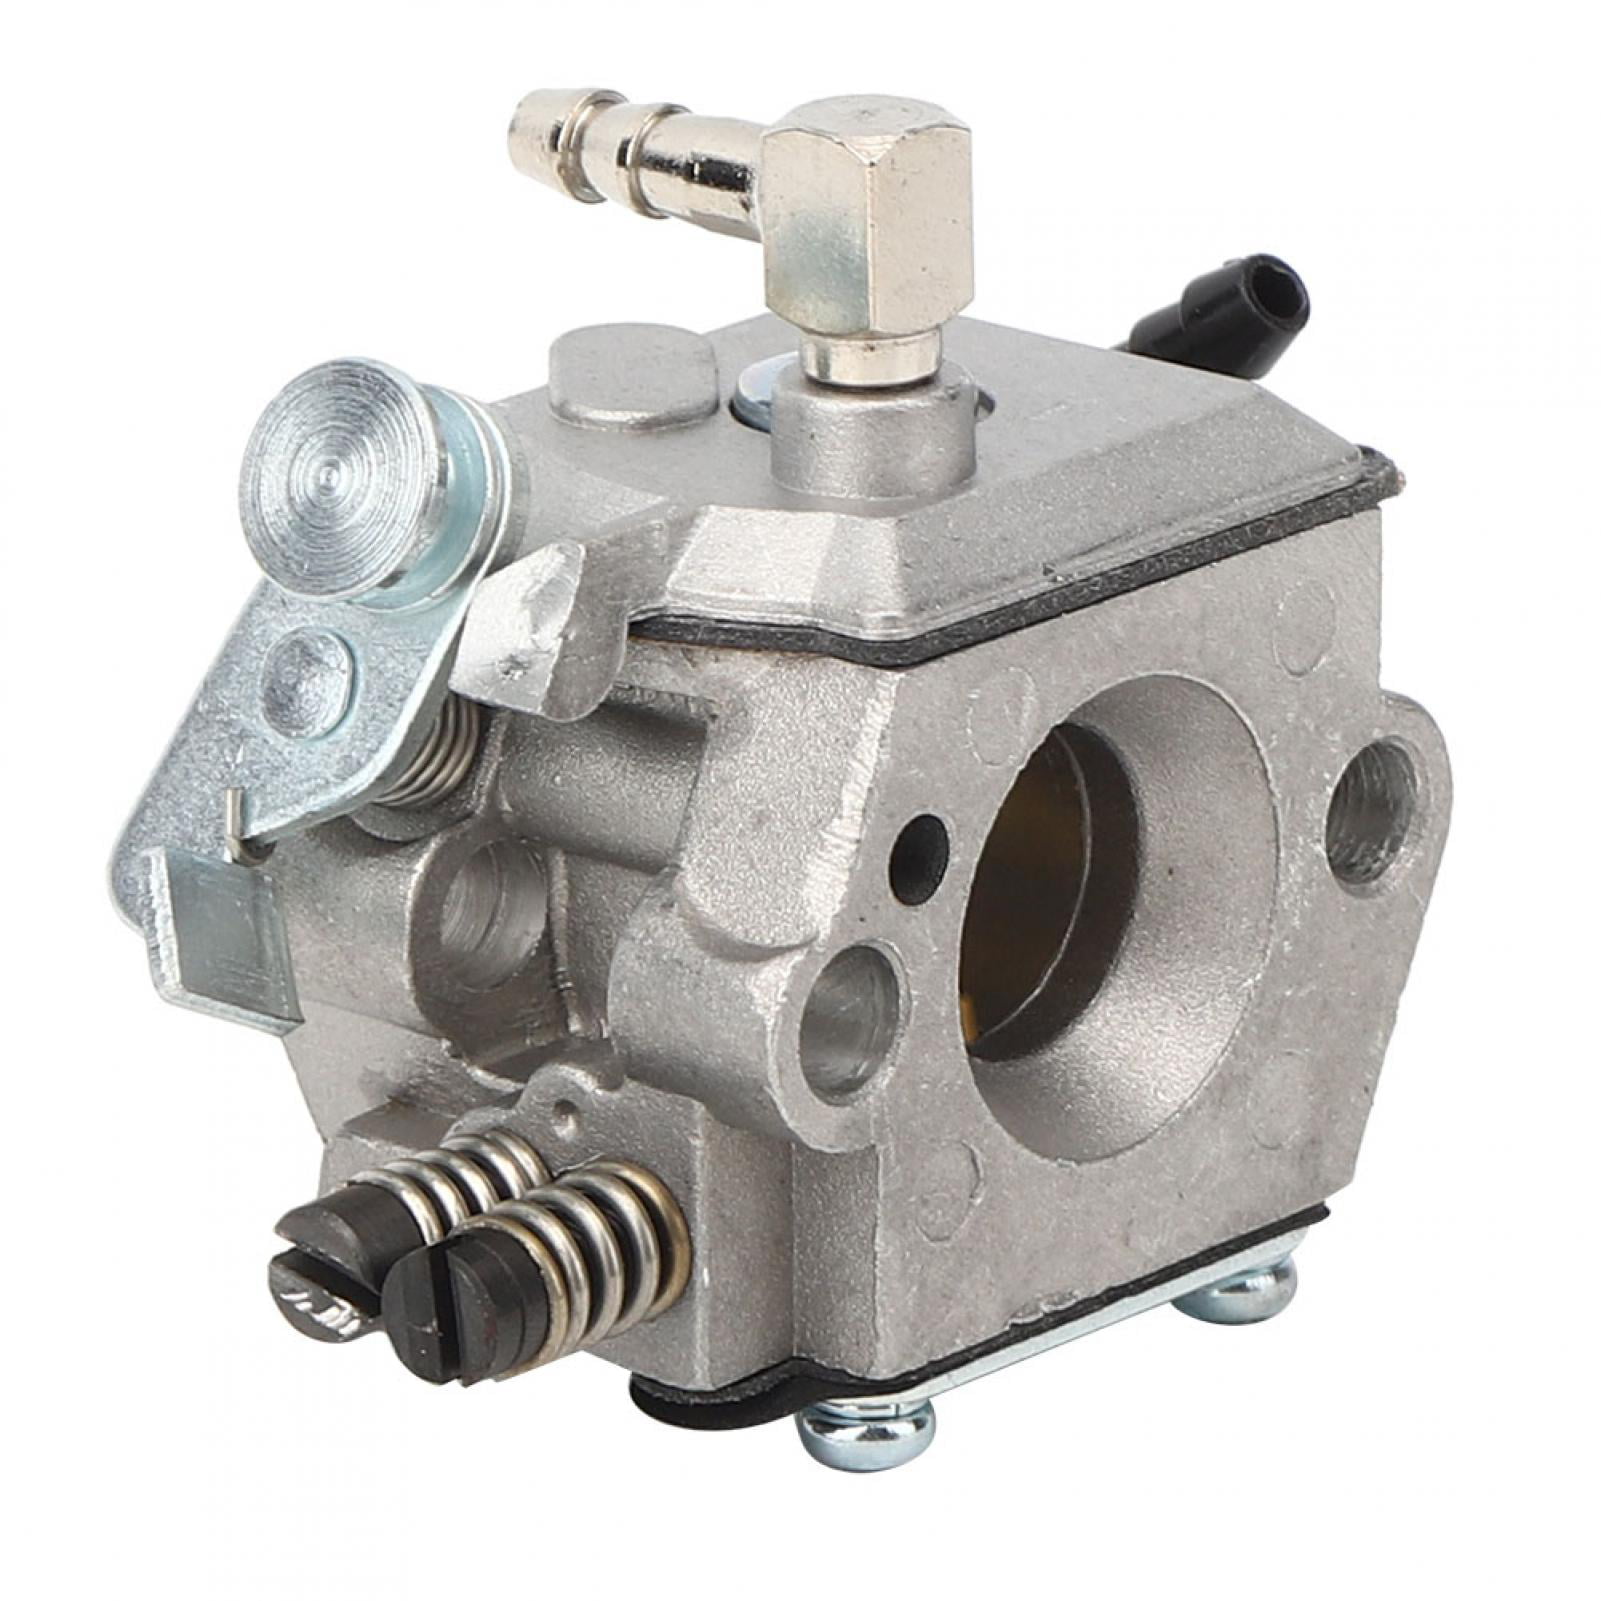 Details about   Garden Die-Casting Aluminum Carburetor Kit Accessory for 028 Chainsaw Hot 